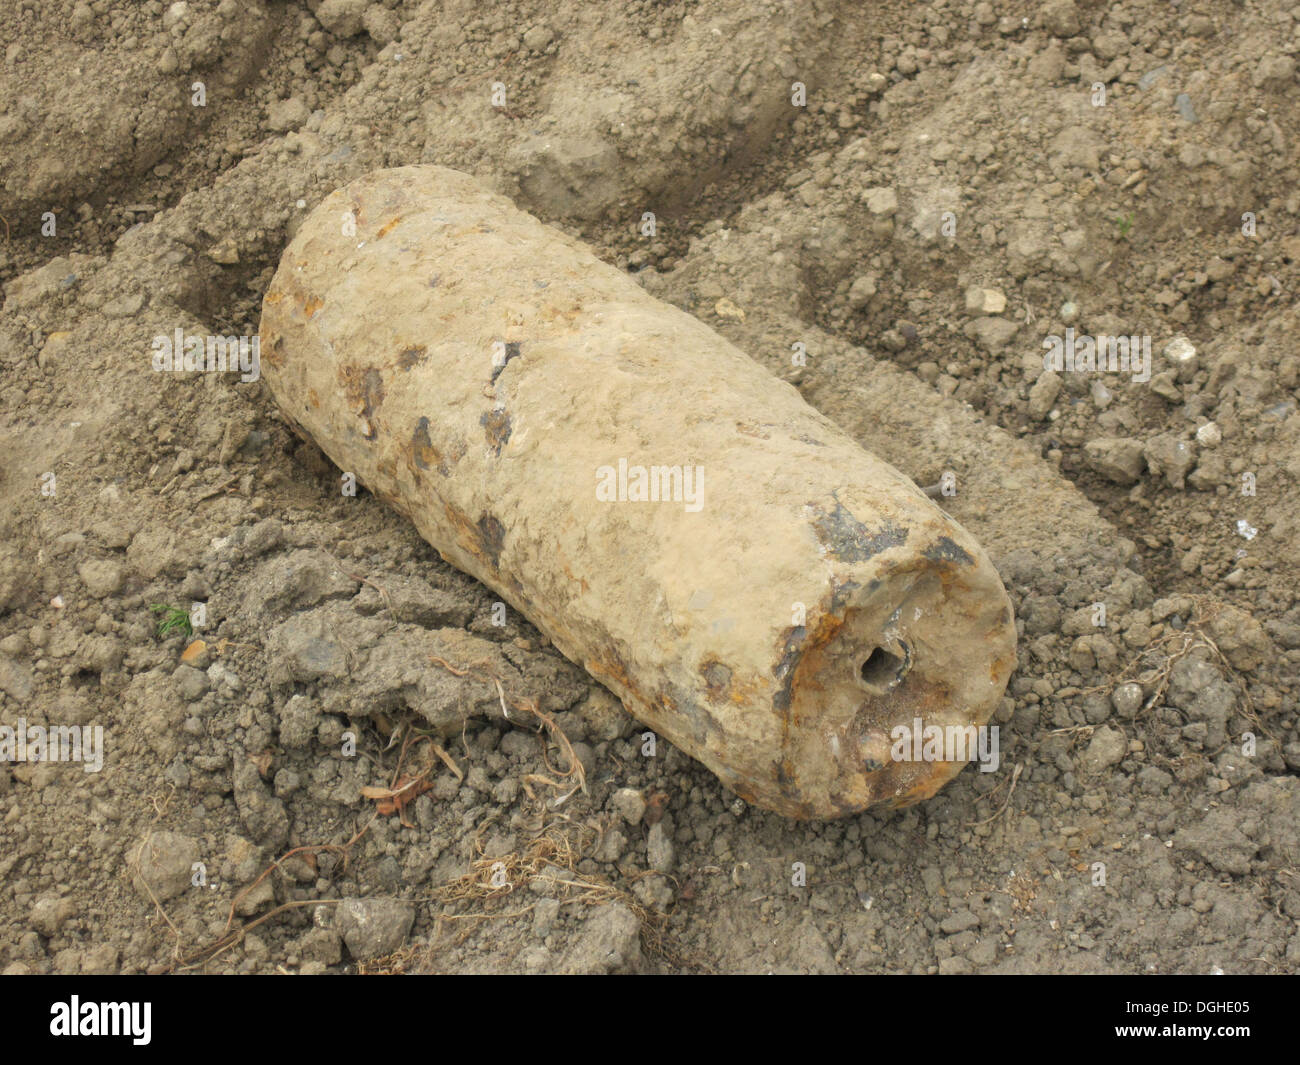 Iron Harvest' World War One shrapnel shell unexploded with shrapnel balls still inside Somme Battlefield Somme Picardy France Stock Photo